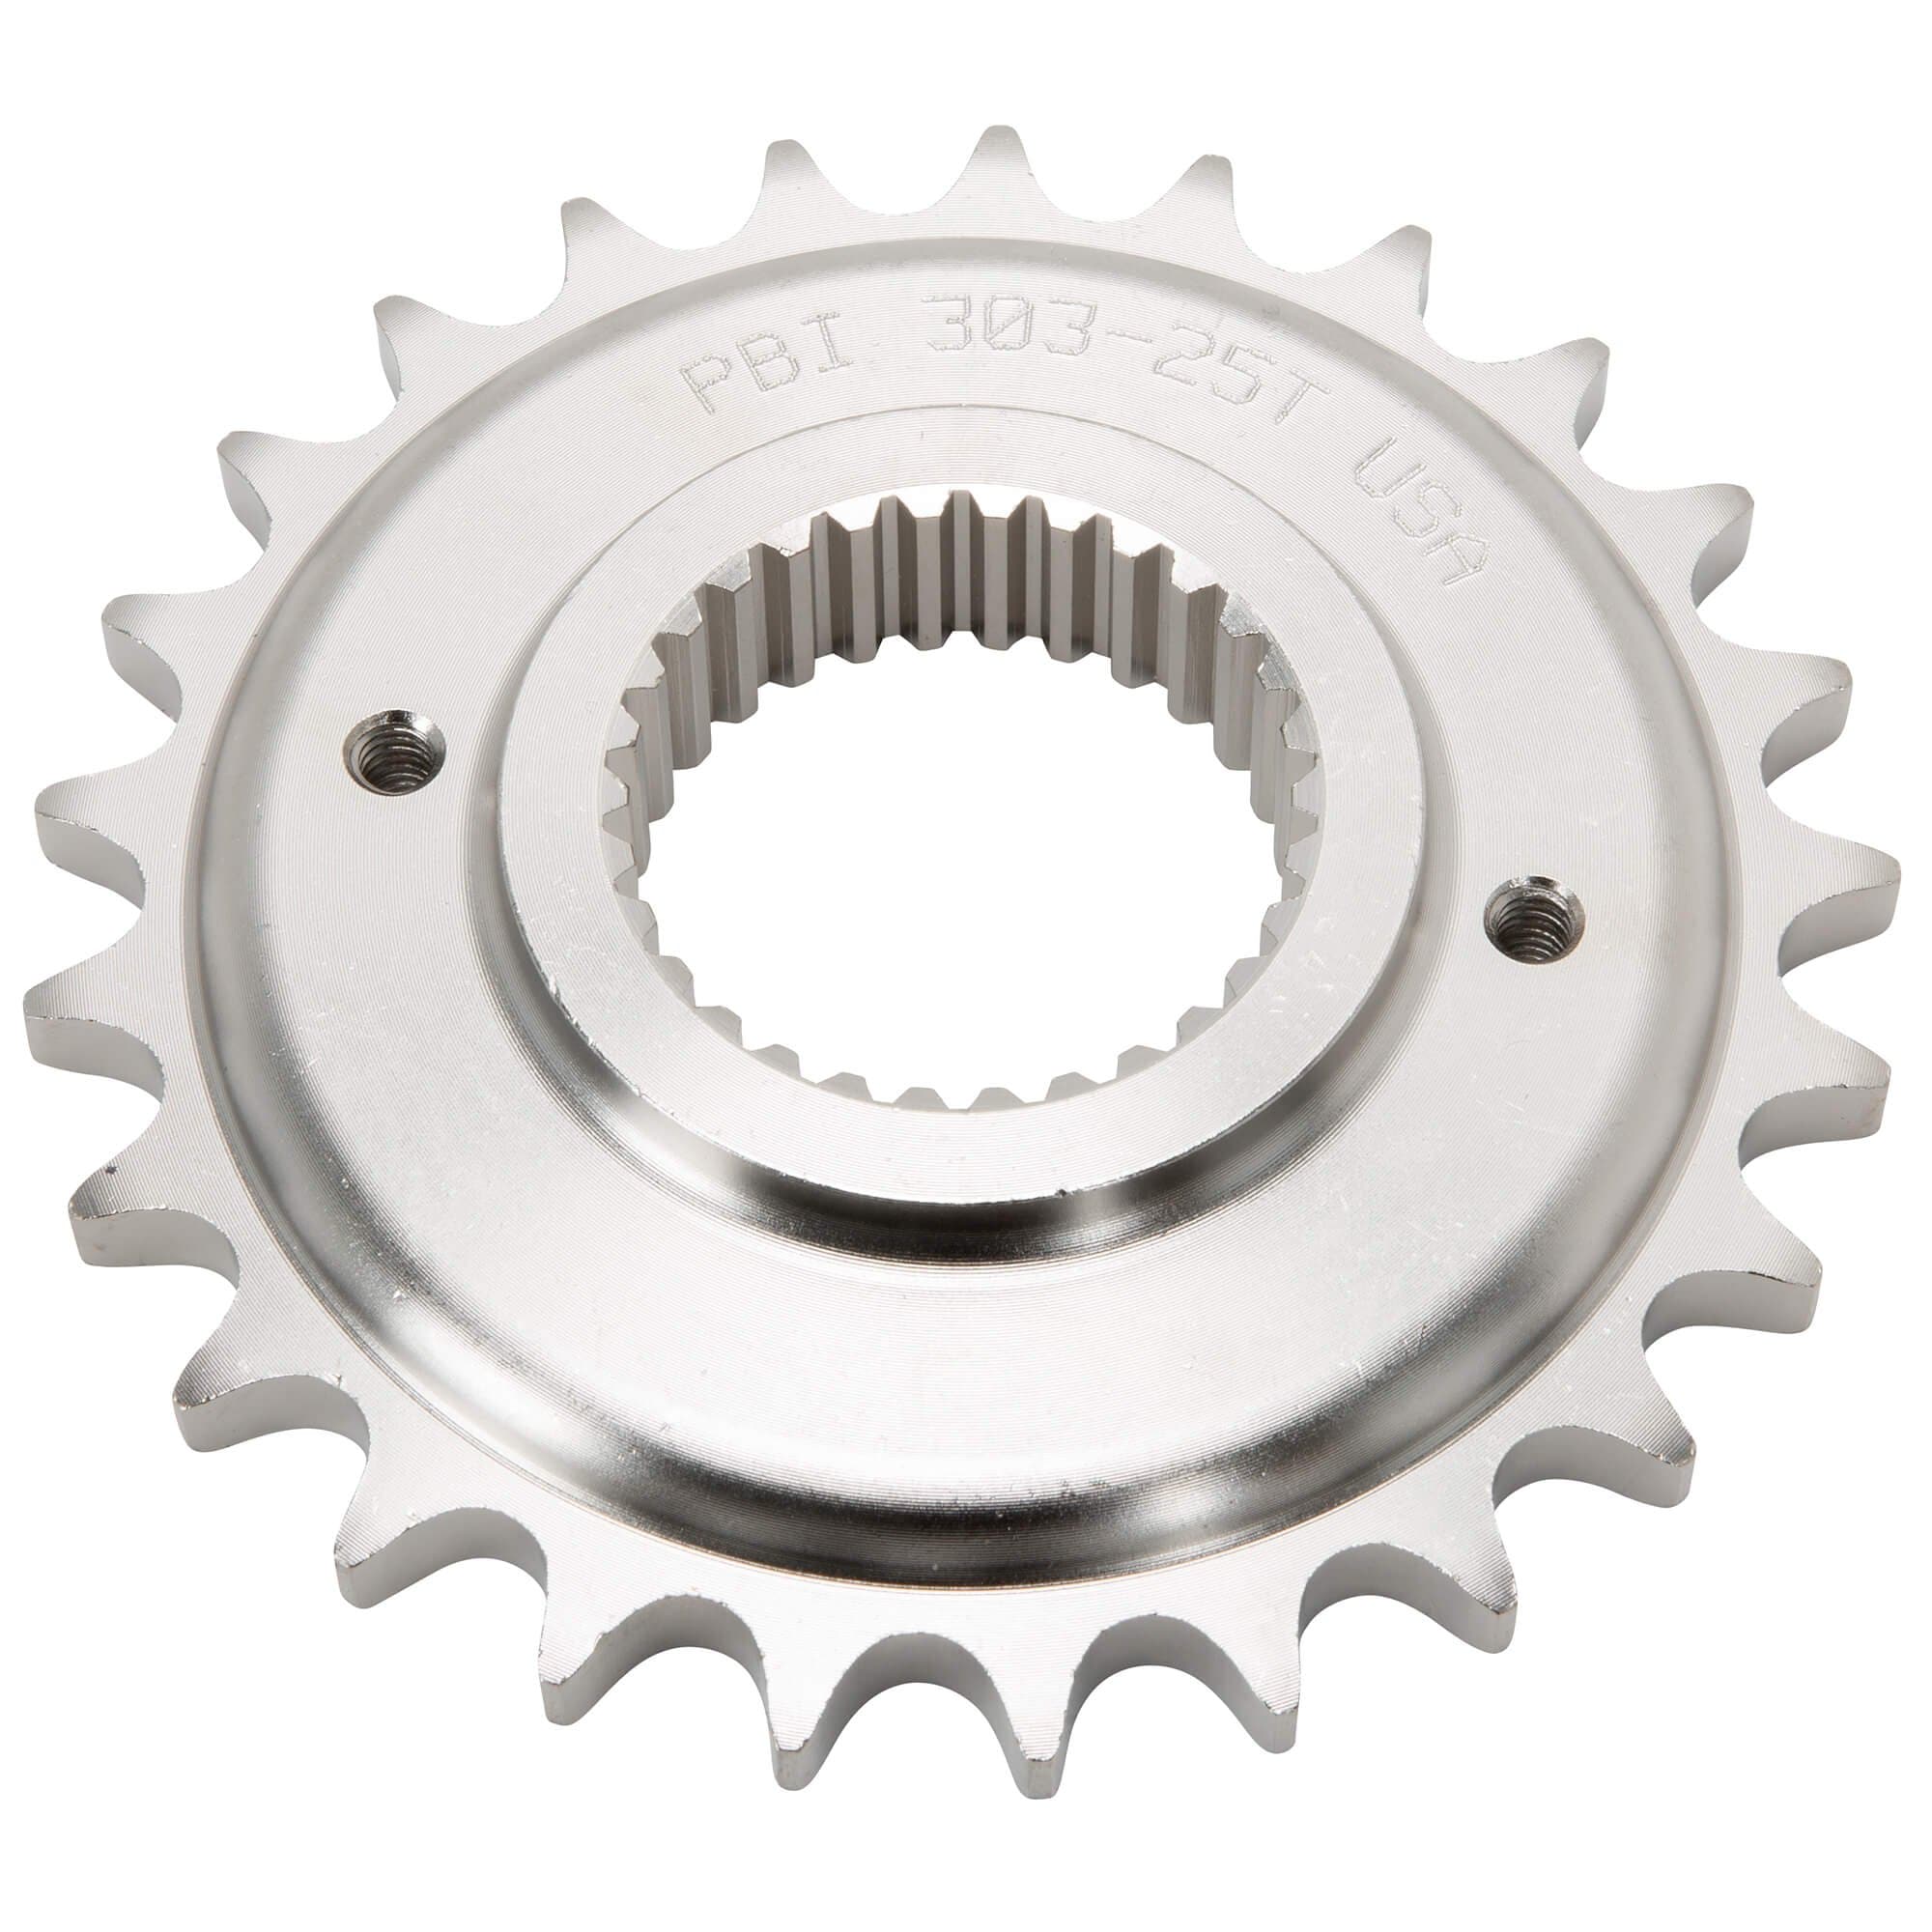 DYNA (All '94-99) Chain Conversion Kit - Steel Sprocket Set with Choice of  Chain - HARLEY DAVIDSON